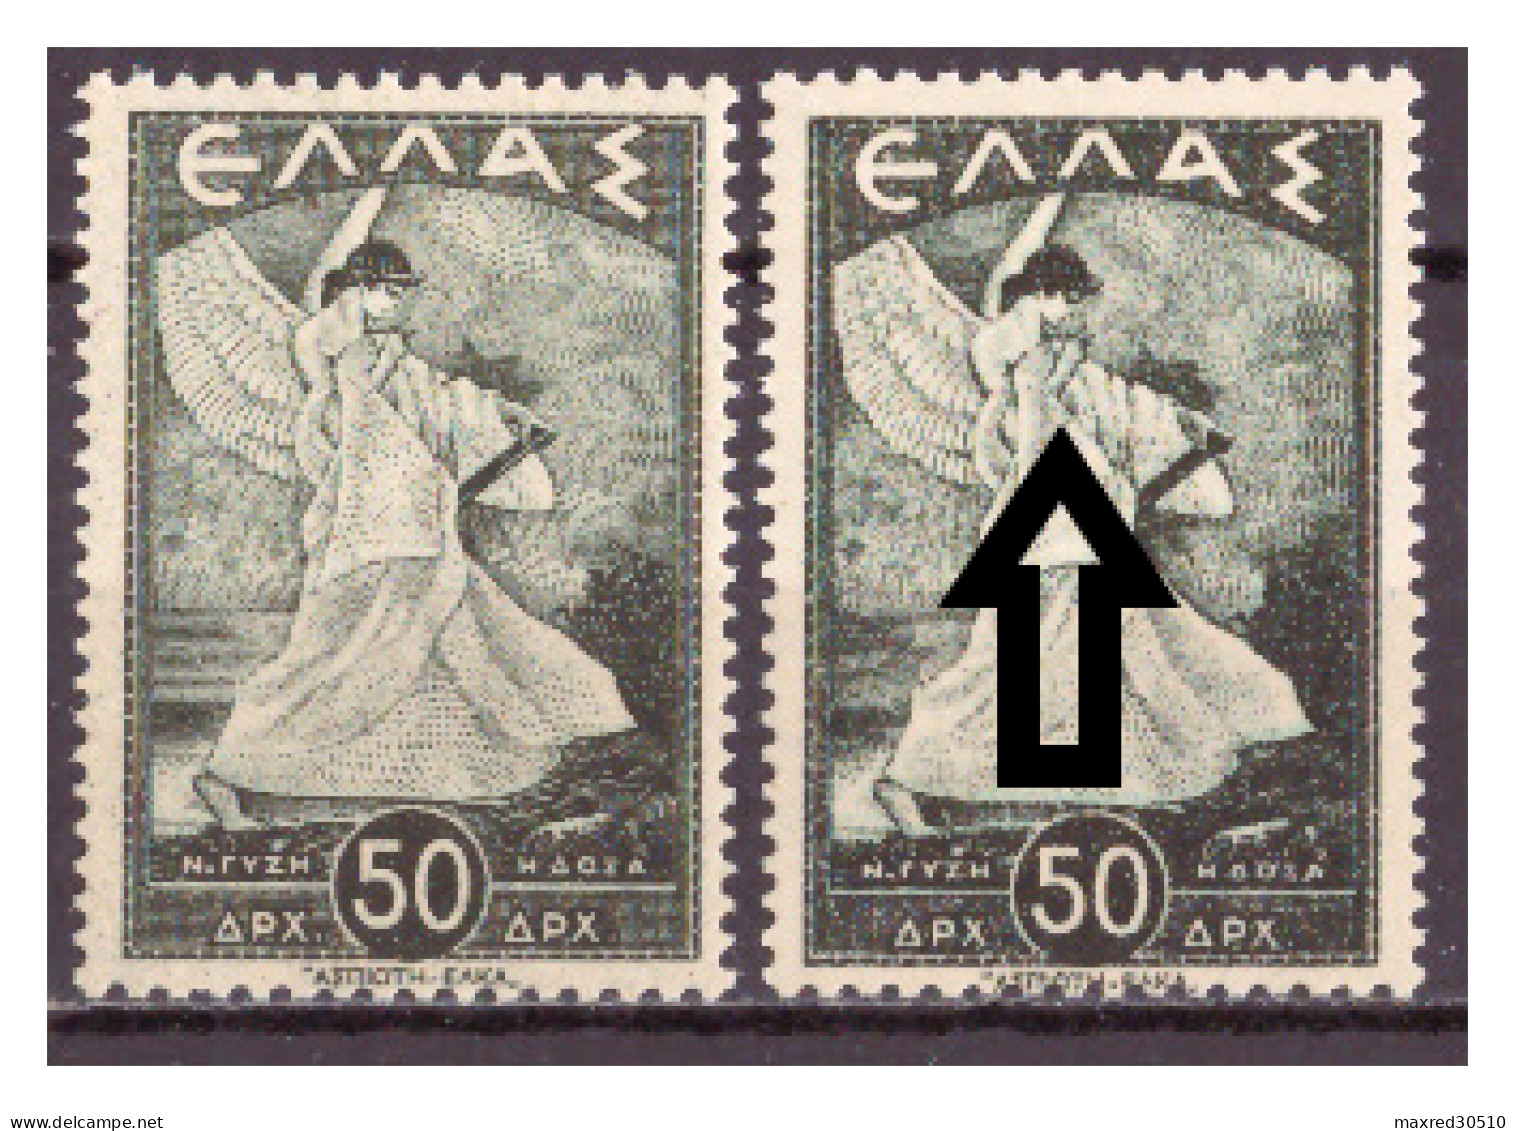 GREECE 1945 2X50L. OF THE "GLORY ISSUE" THE 2ND ONE (SEE ARROWS) WITH MIRROR PRINTING AT THE GUM ERROR MNH - Errors, Freaks & Oddities (EFO)